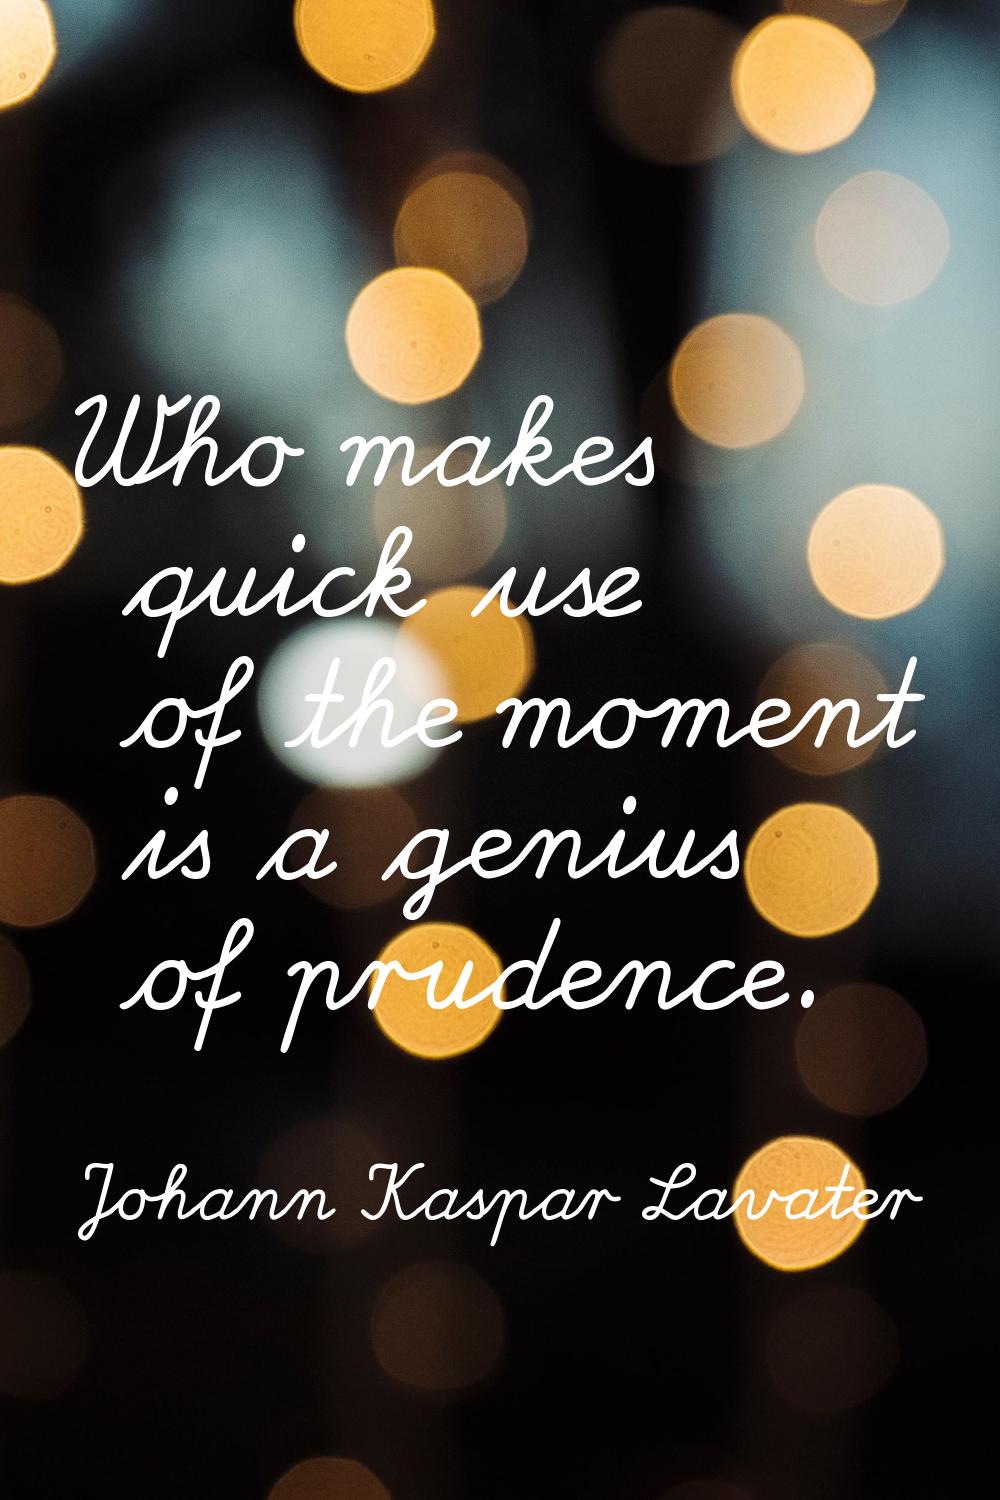 Who makes quick use of the moment is a genius of prudence.